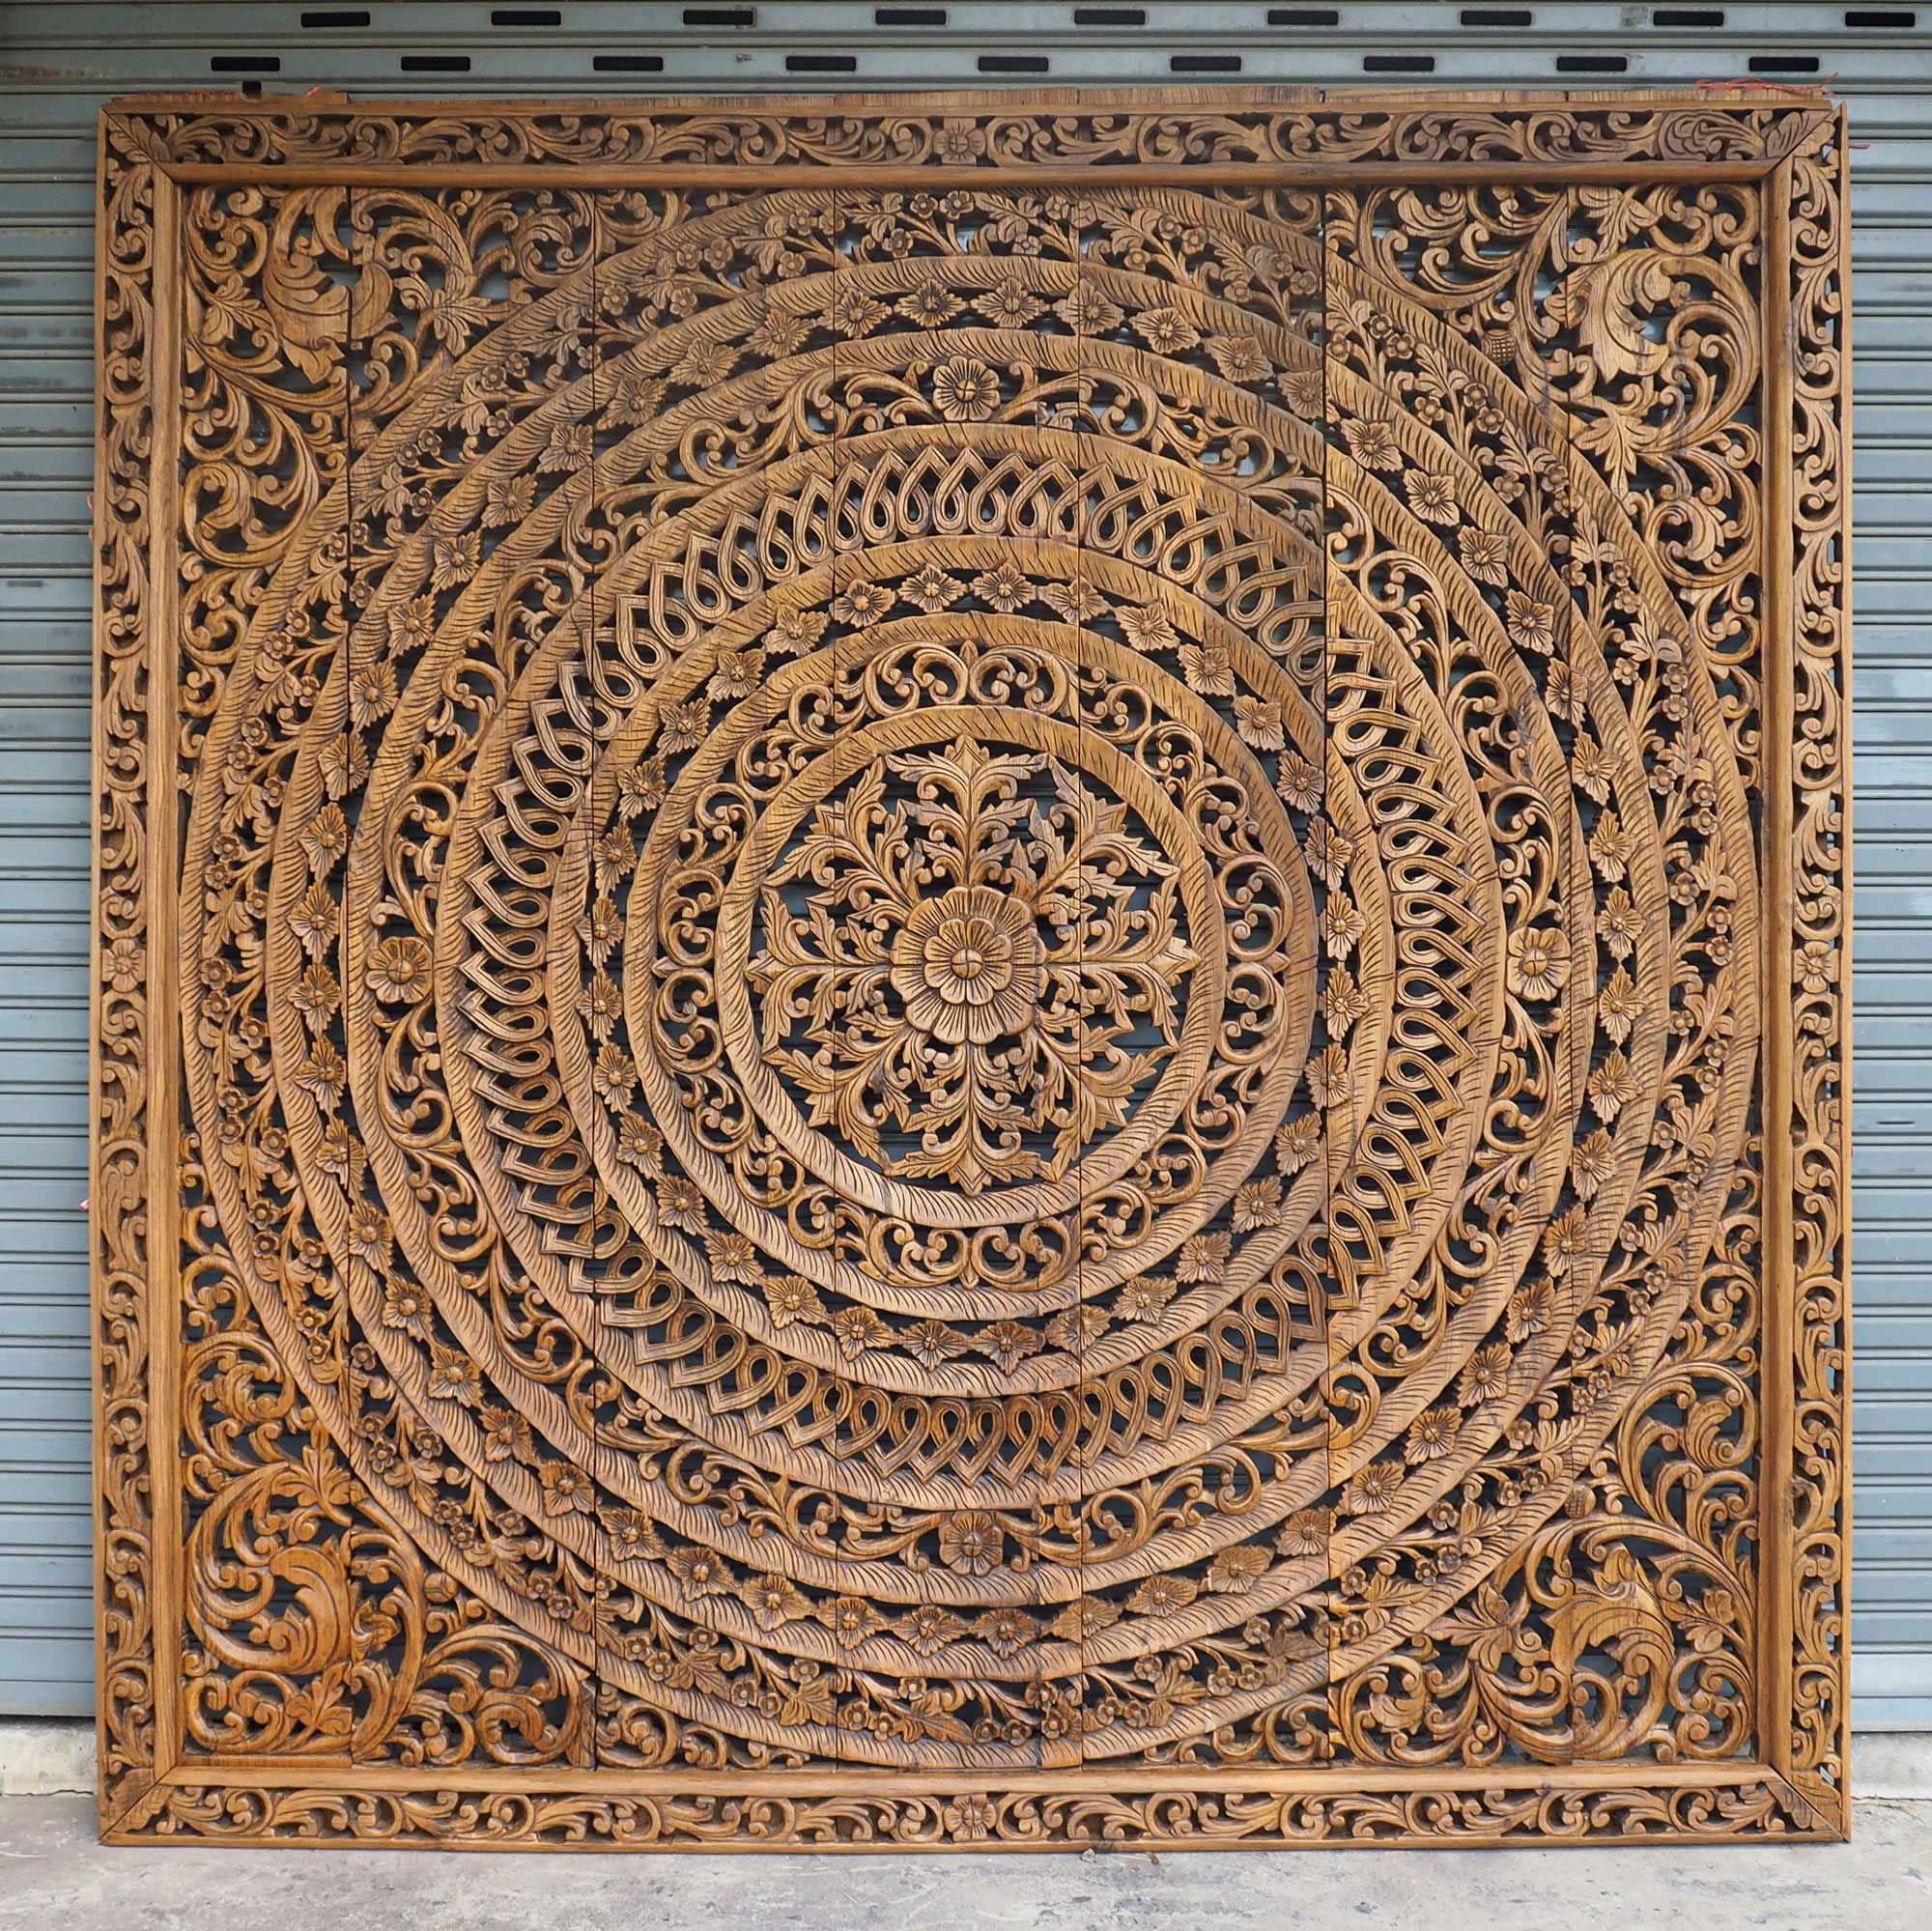 Buy Large Handmade Relief Carving Tropical Home Decor Online With Regard To Tropical Wood Wall Art (View 13 of 15)